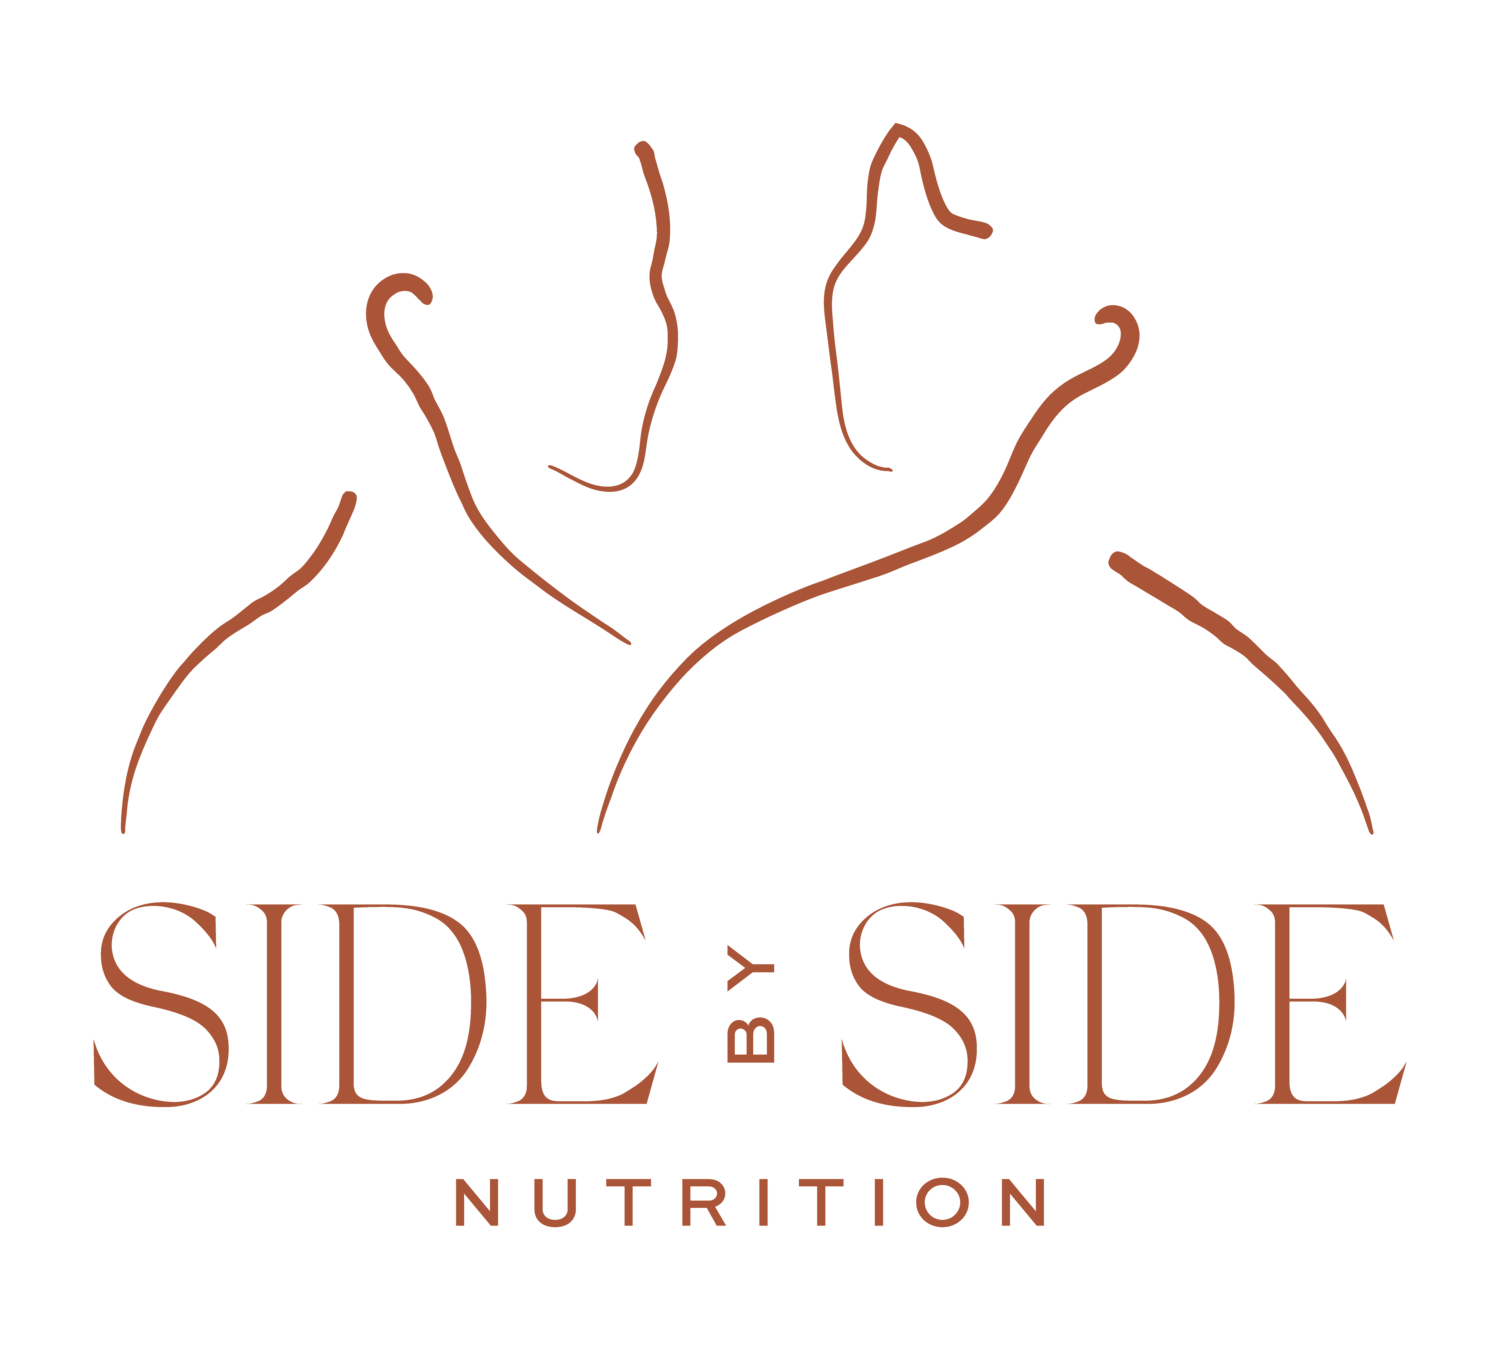 Eating Disorders Treatment Dietitian Nutritionist in Colorado Springs & Fort Collins, CO